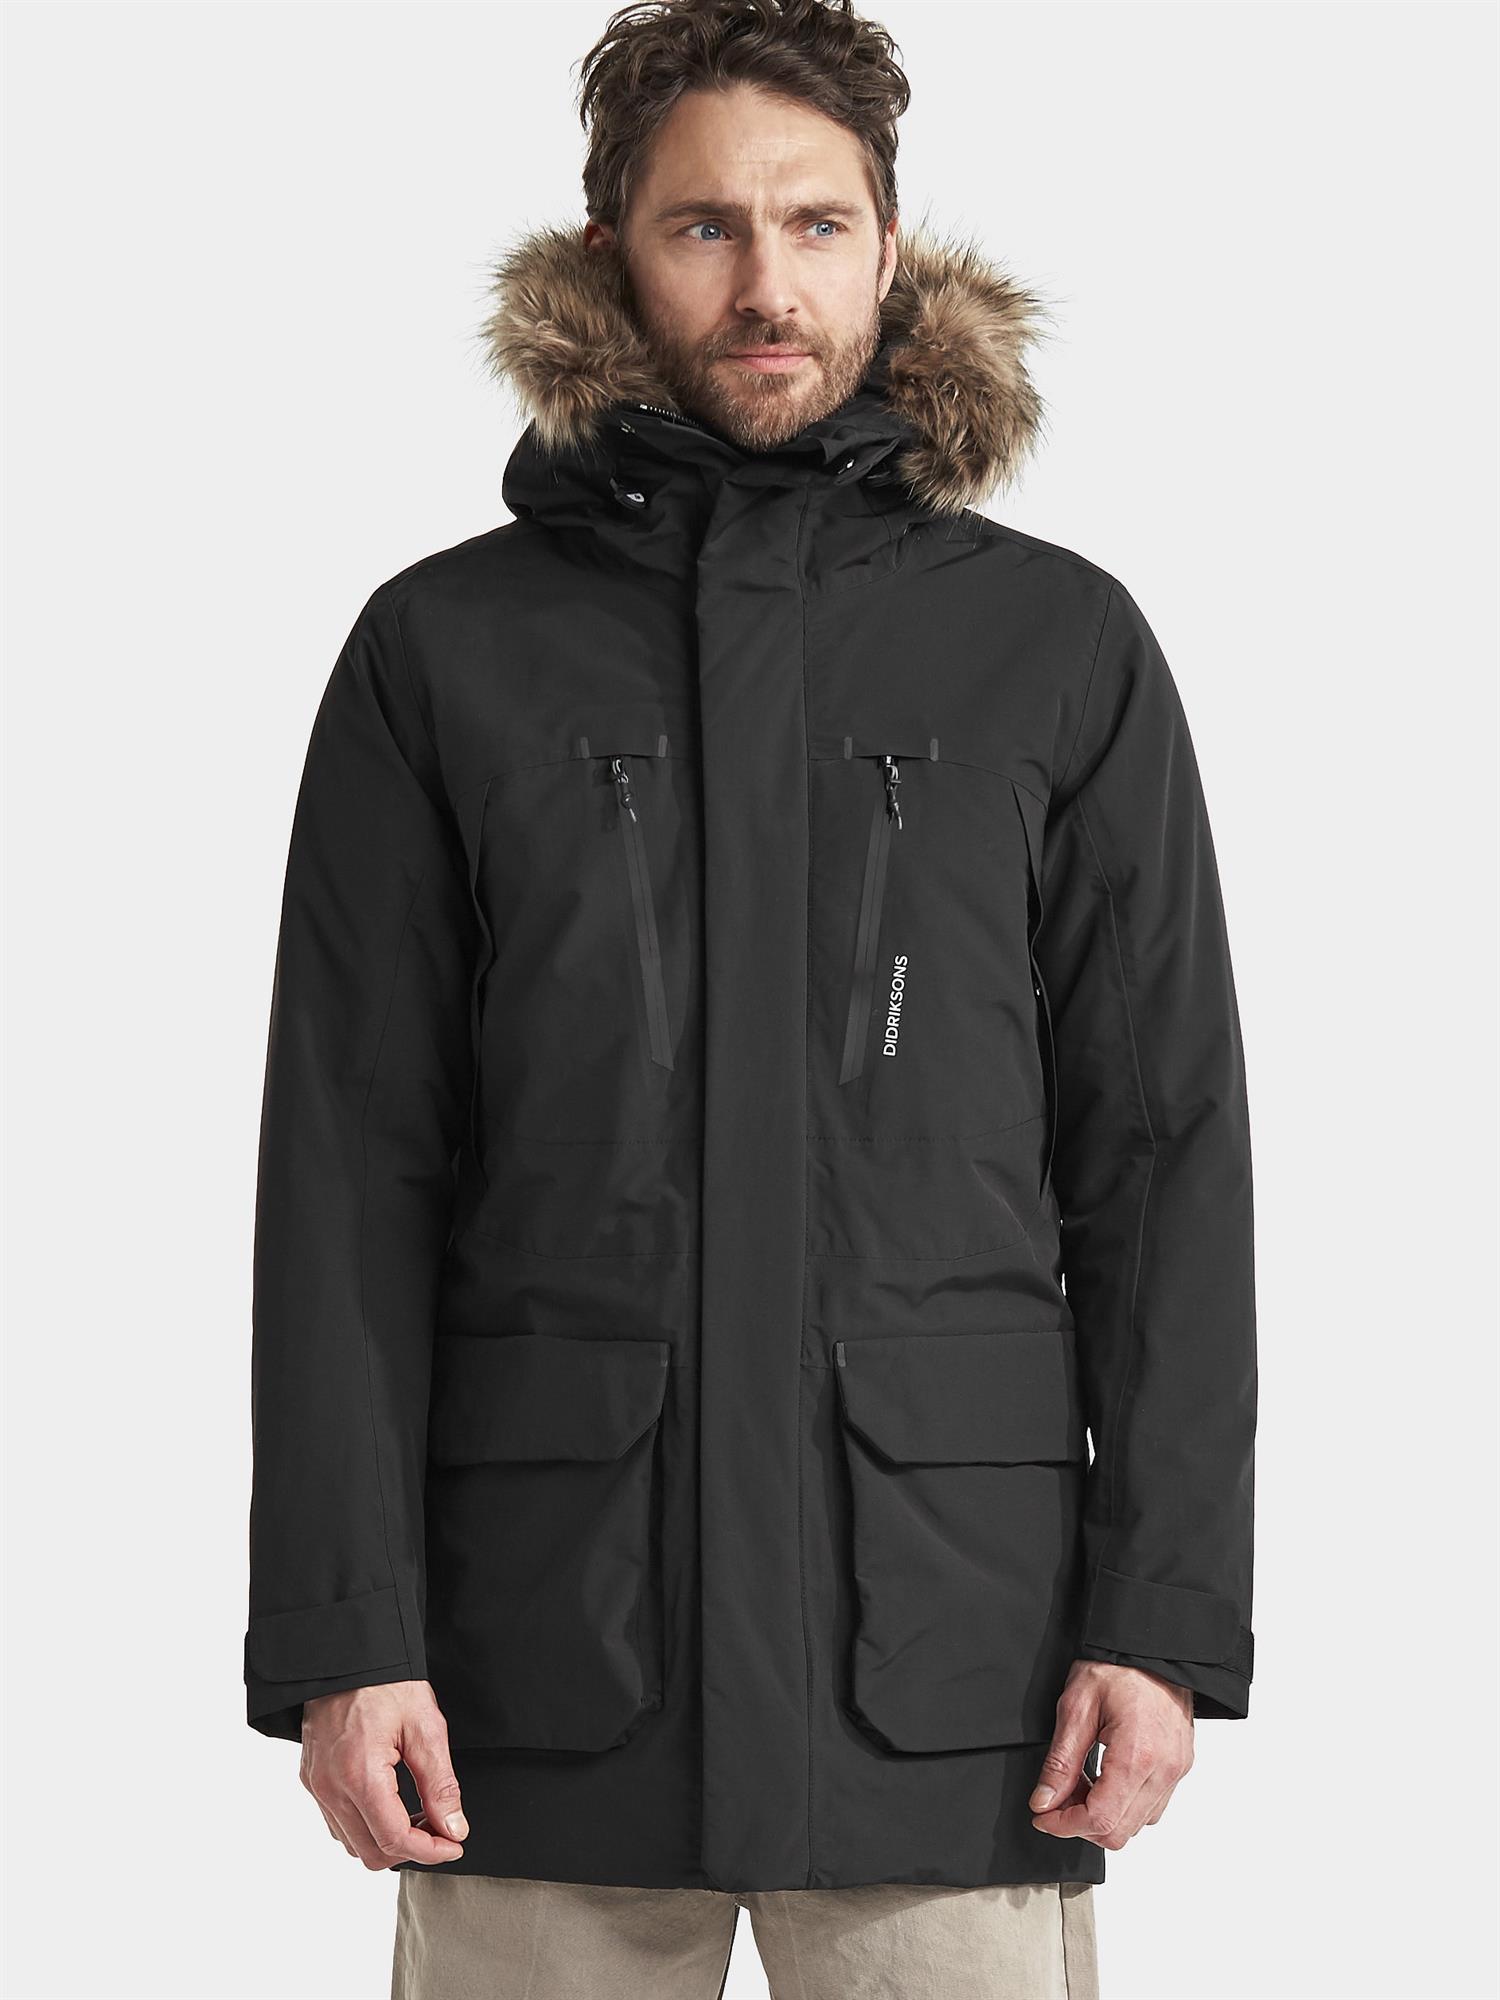 Didriksons Marco Mens Insulated Waterproof Parka | eBay